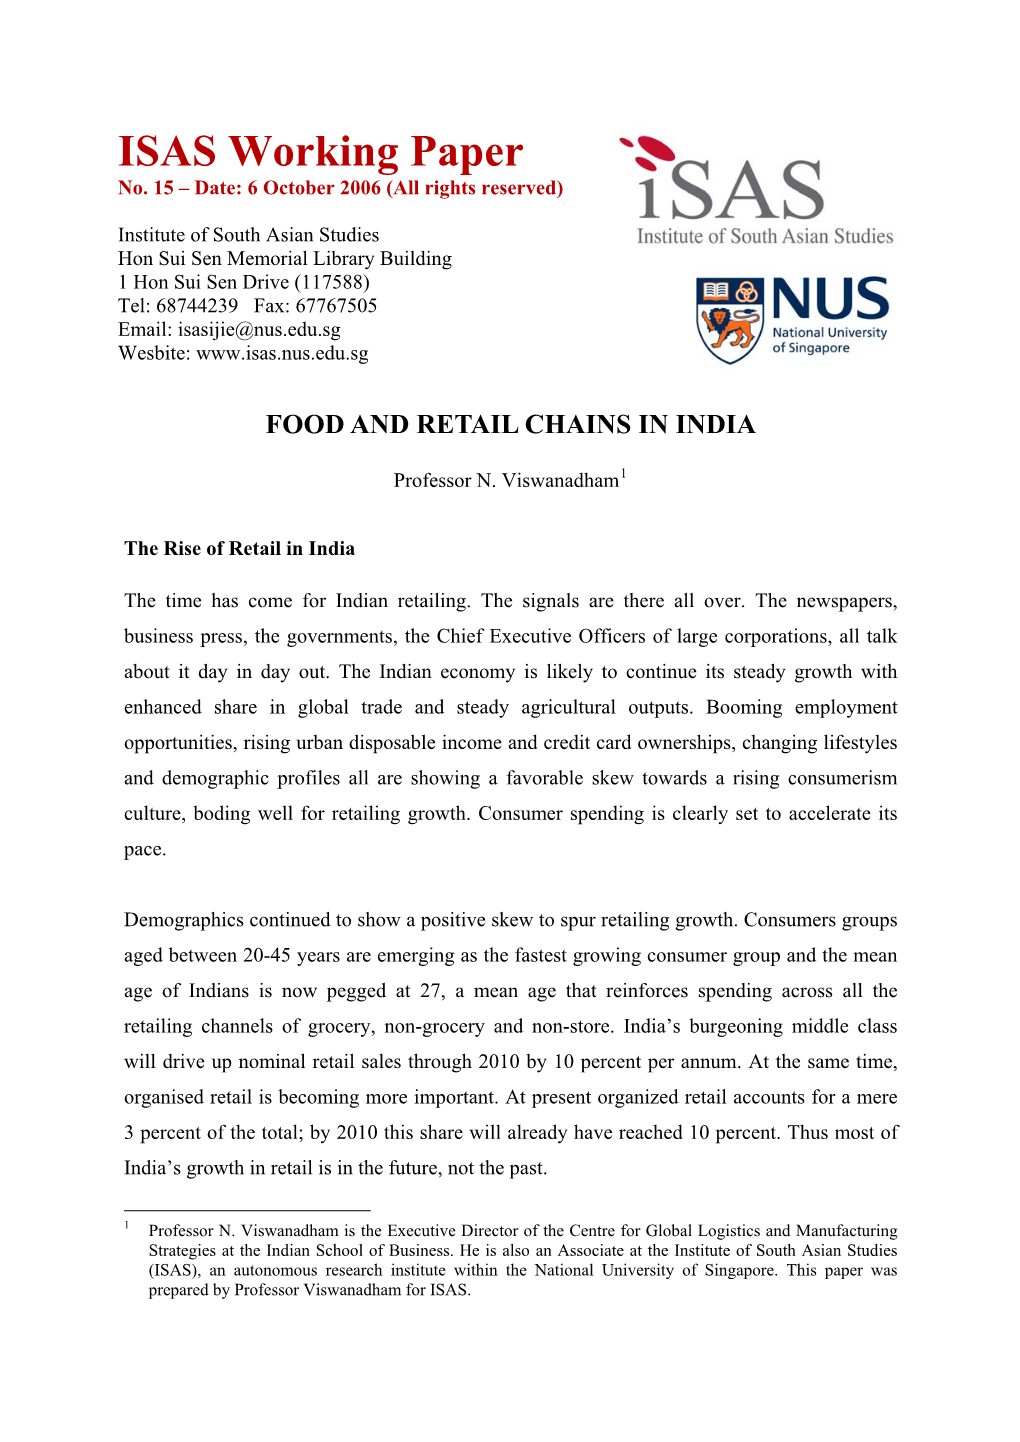 Food and Retail Chains in India